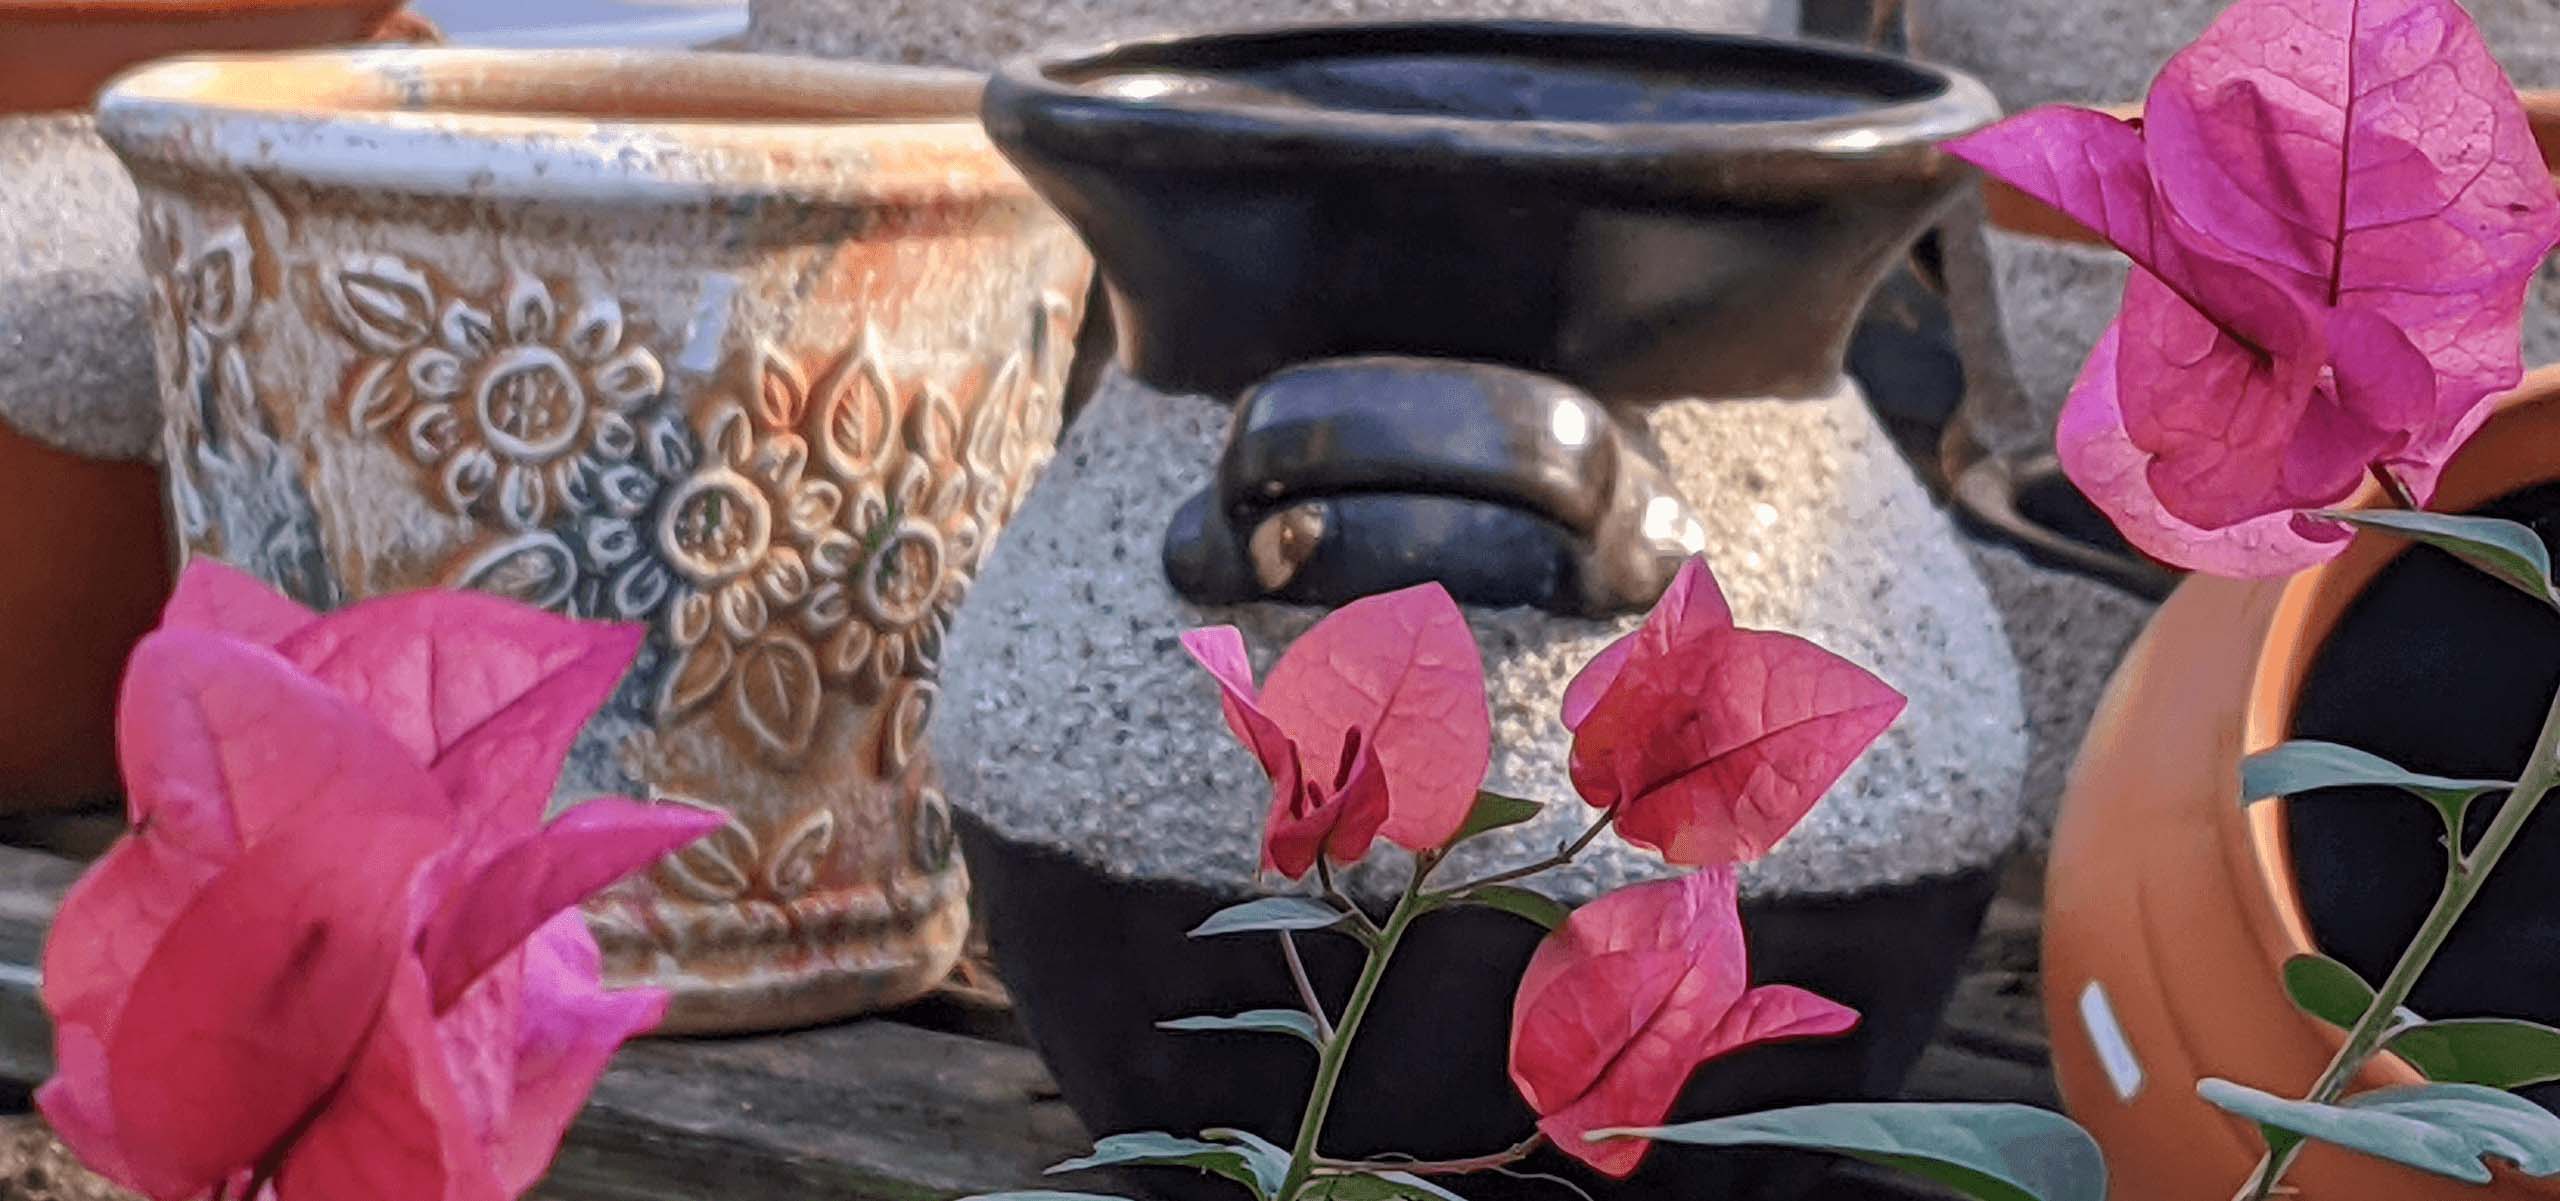 Bougainvilleas and Pots